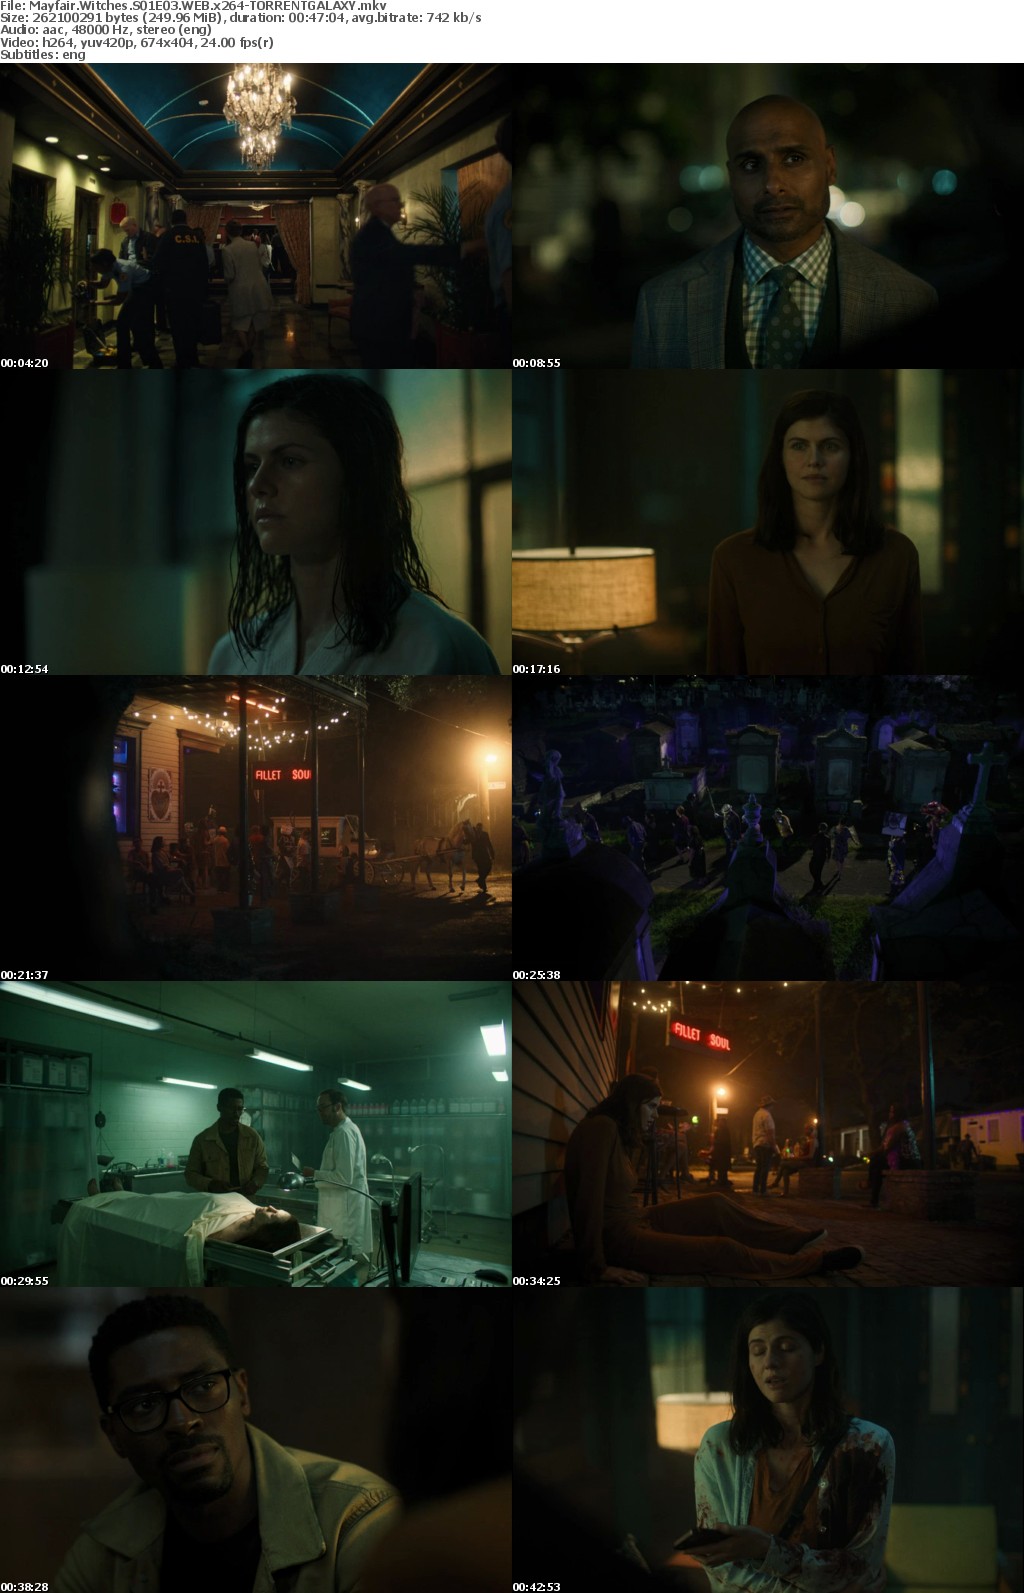 Mayfair Witches S01E03 WEB x264-GALAXY